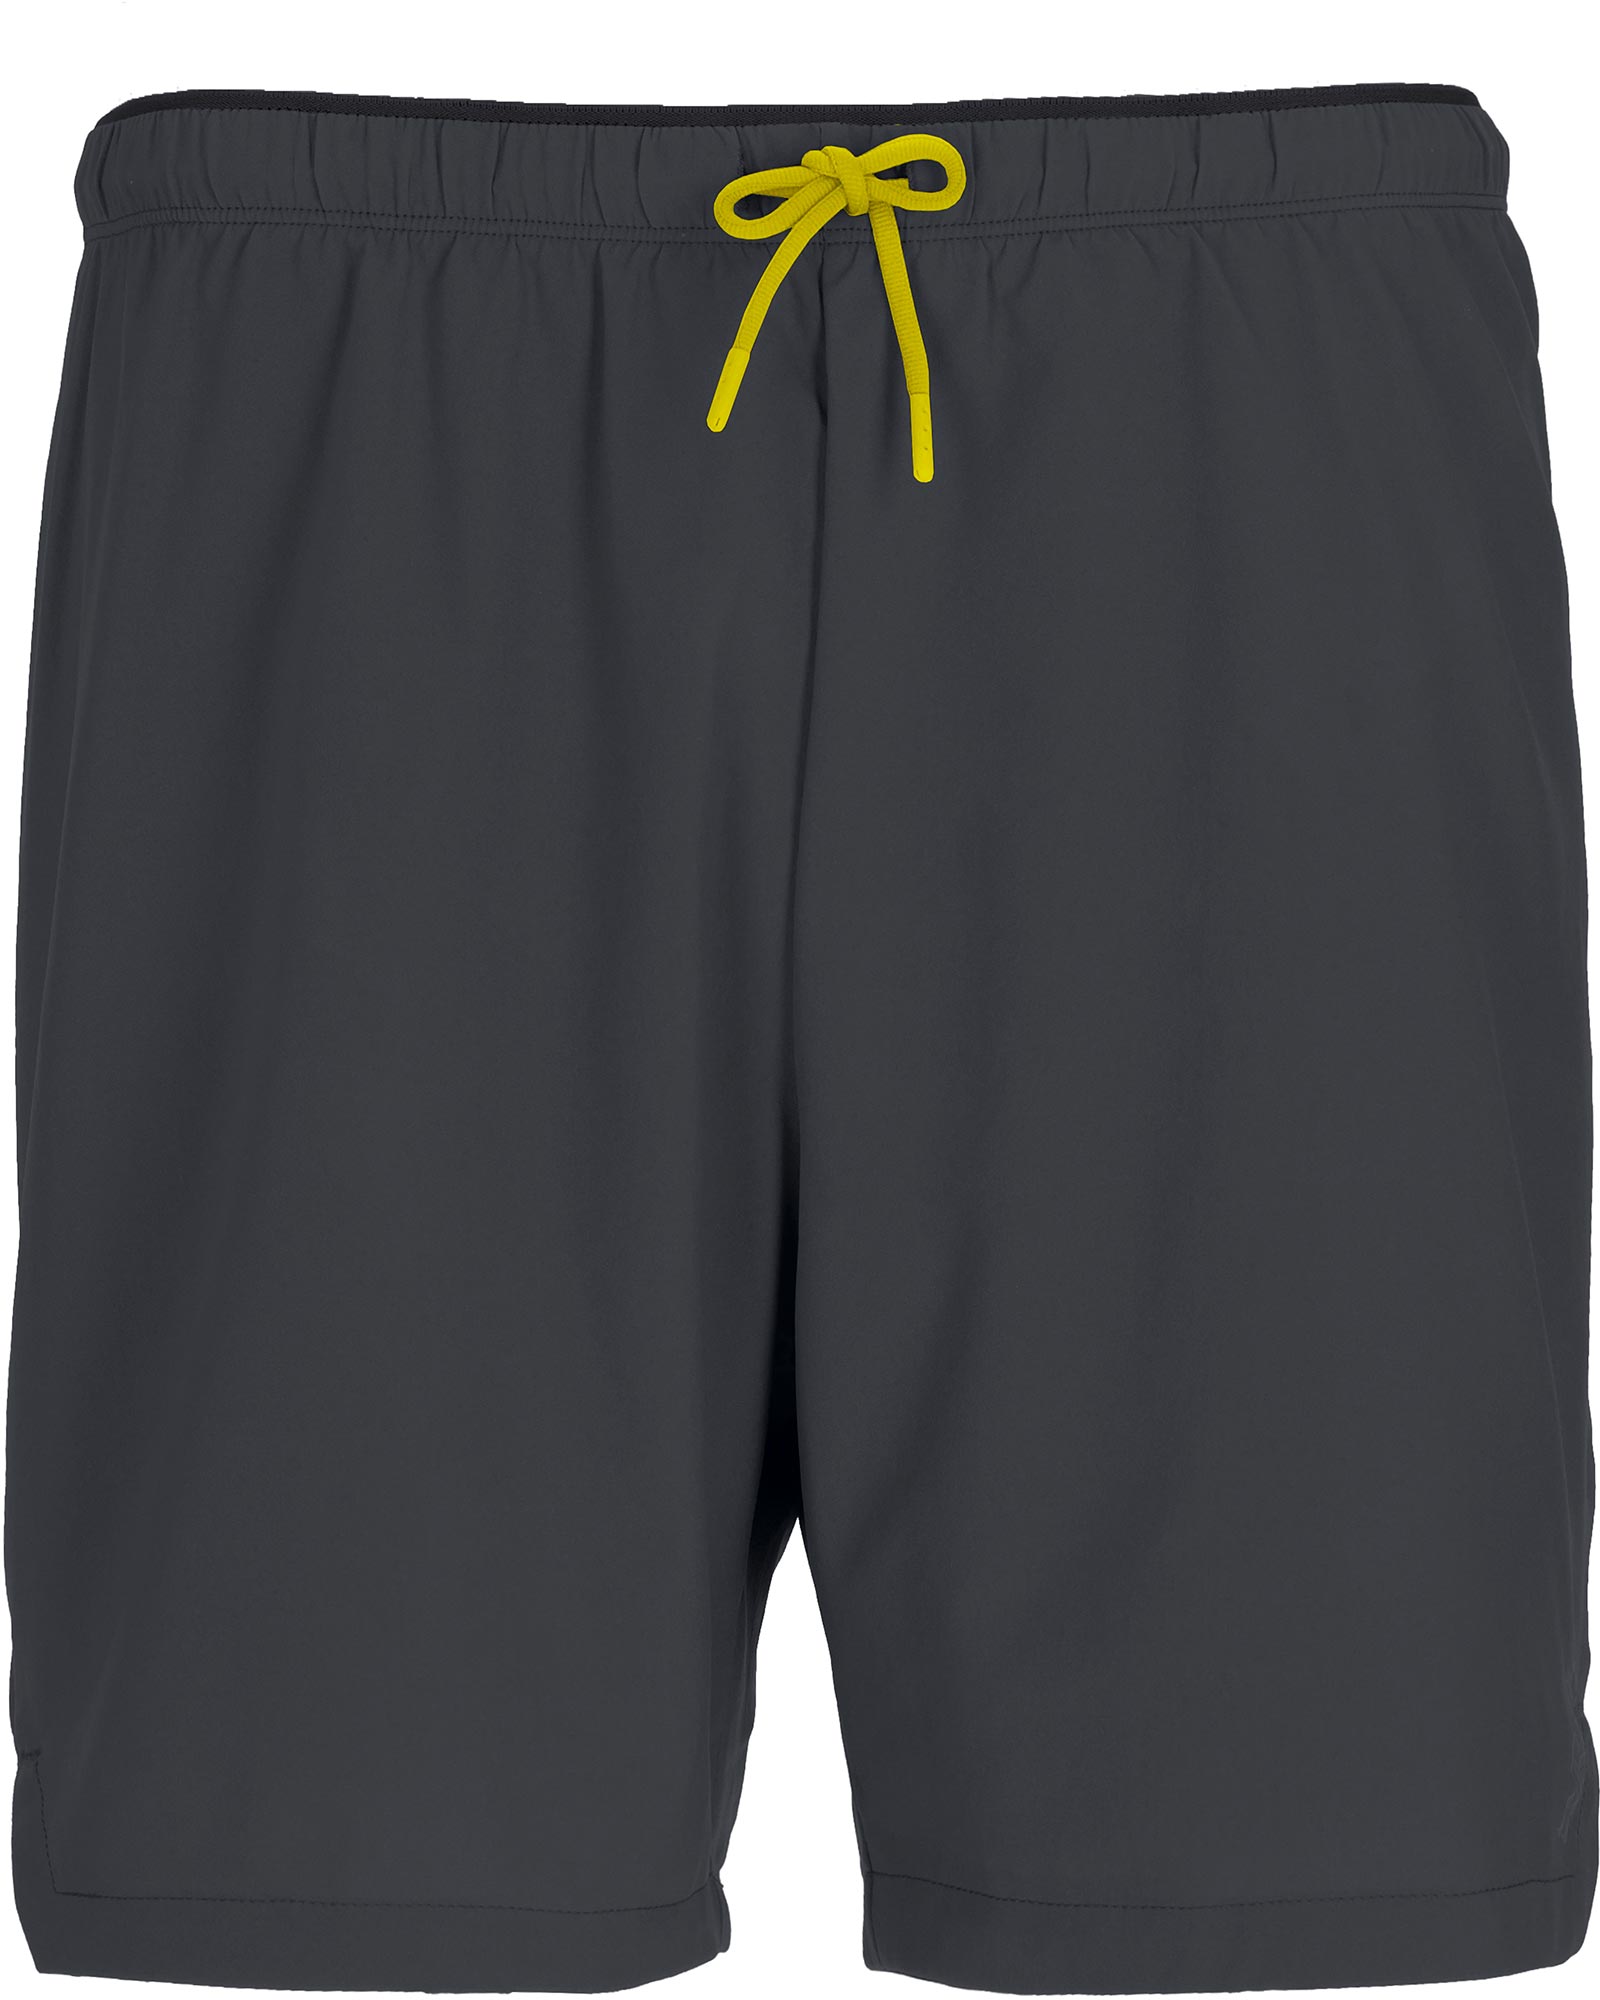 Product image of Rab Talus Active Men's Shorts